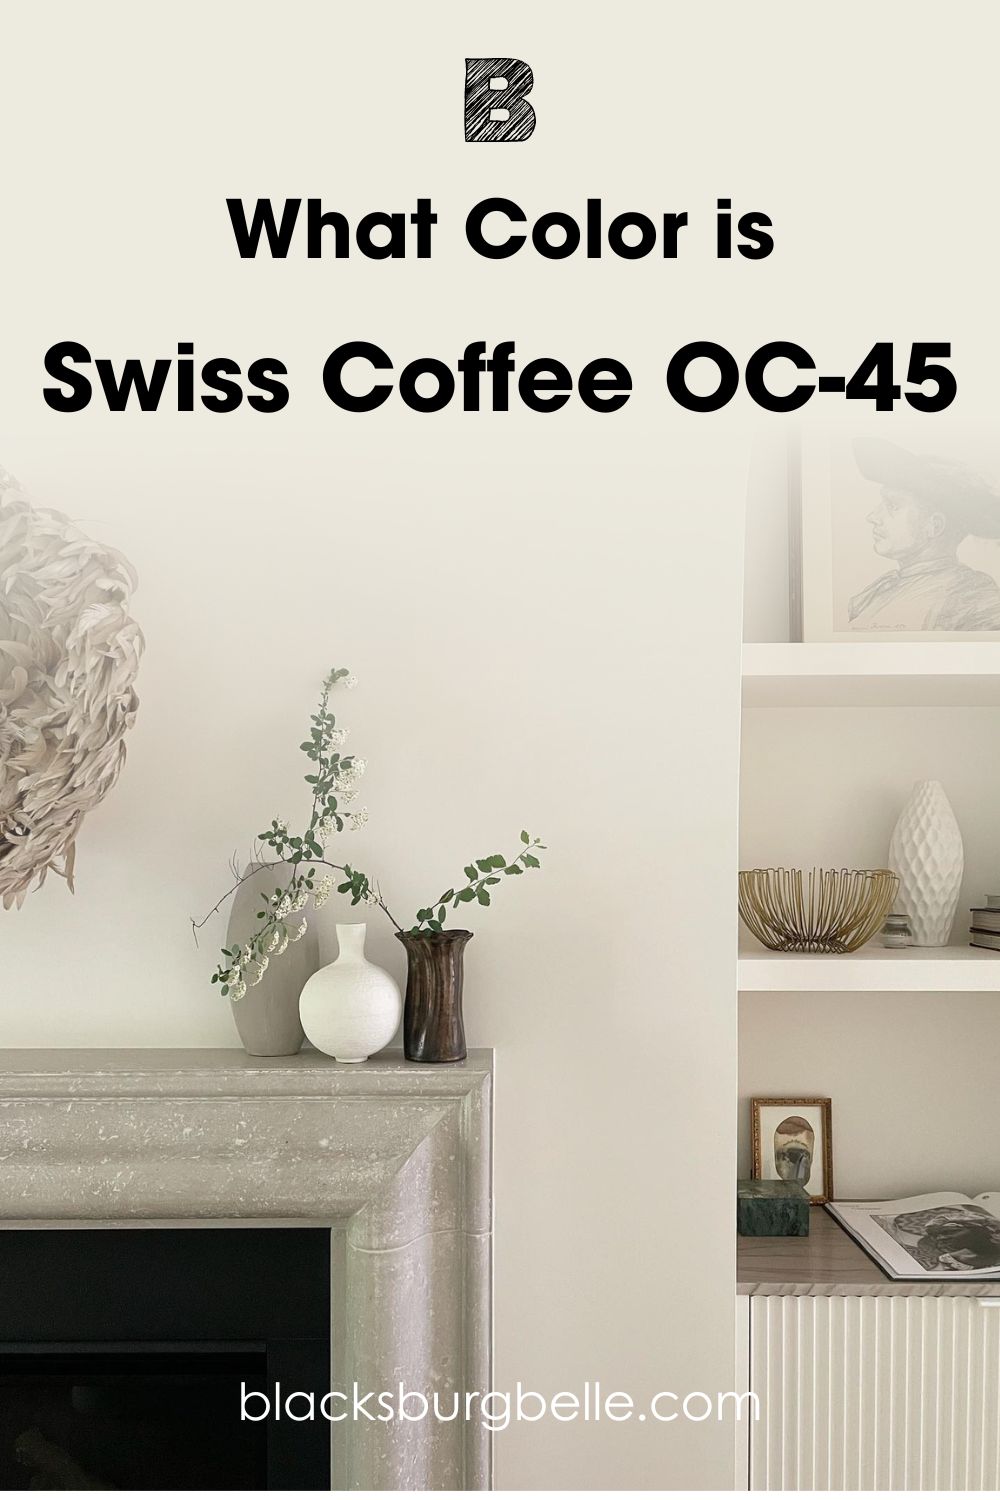 What Color is Swiss Coffee